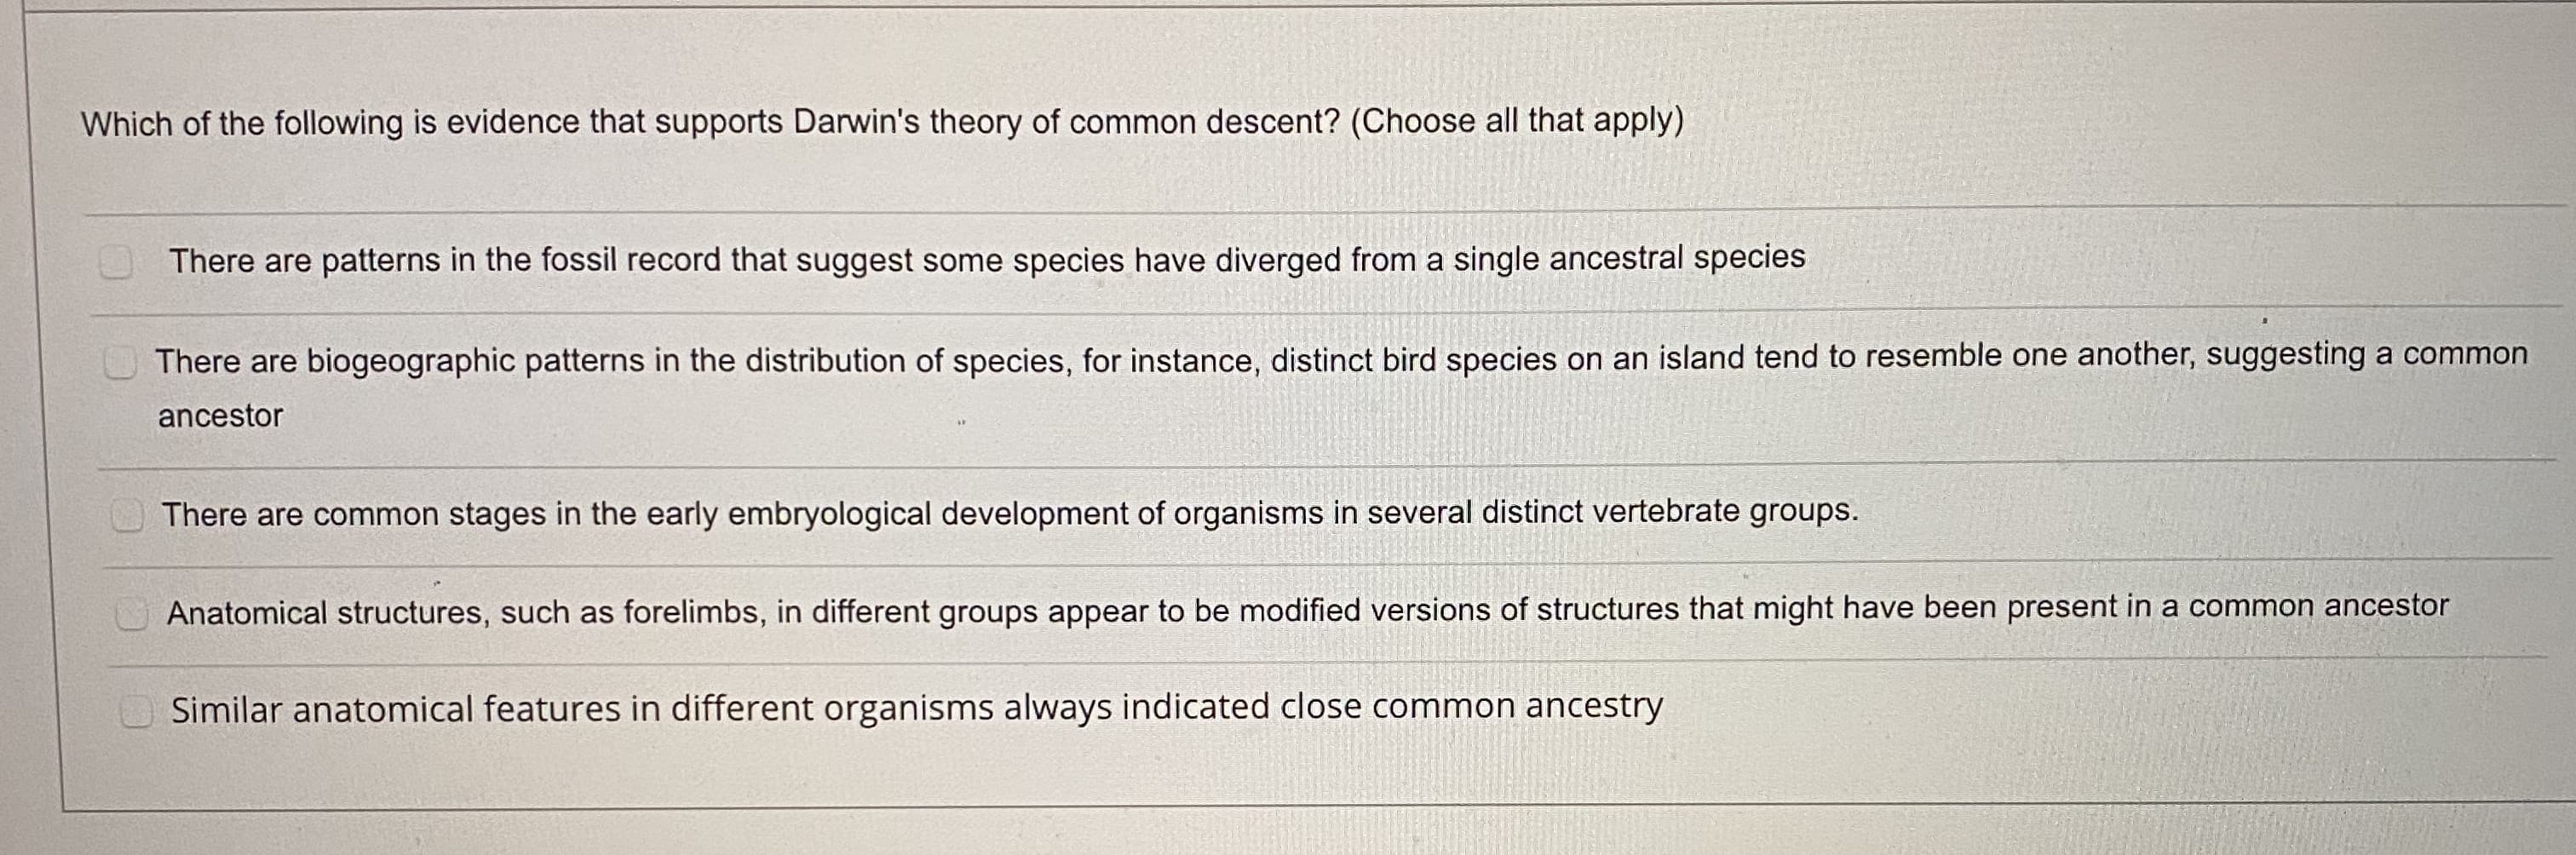 Which of the following is evidence that supports Darwin's theory of common descent? (Choose all that apply)
There are patterns in the fossil record that suggest some species have diverged from a single ancestral species
There are biogeographic patterns in the distribution of species, for instance, distinct bird species on an island tend to resemble one another, s
ancestor
There are common stages in the early embryological development of organisms in several distinct vertebrate groups.
Anatomical structures, such as forelimbs, in different groups appear to be modified versions of structures that might have been present in a co
Similar anatomical features in different organisms always indicated close common ancestry
